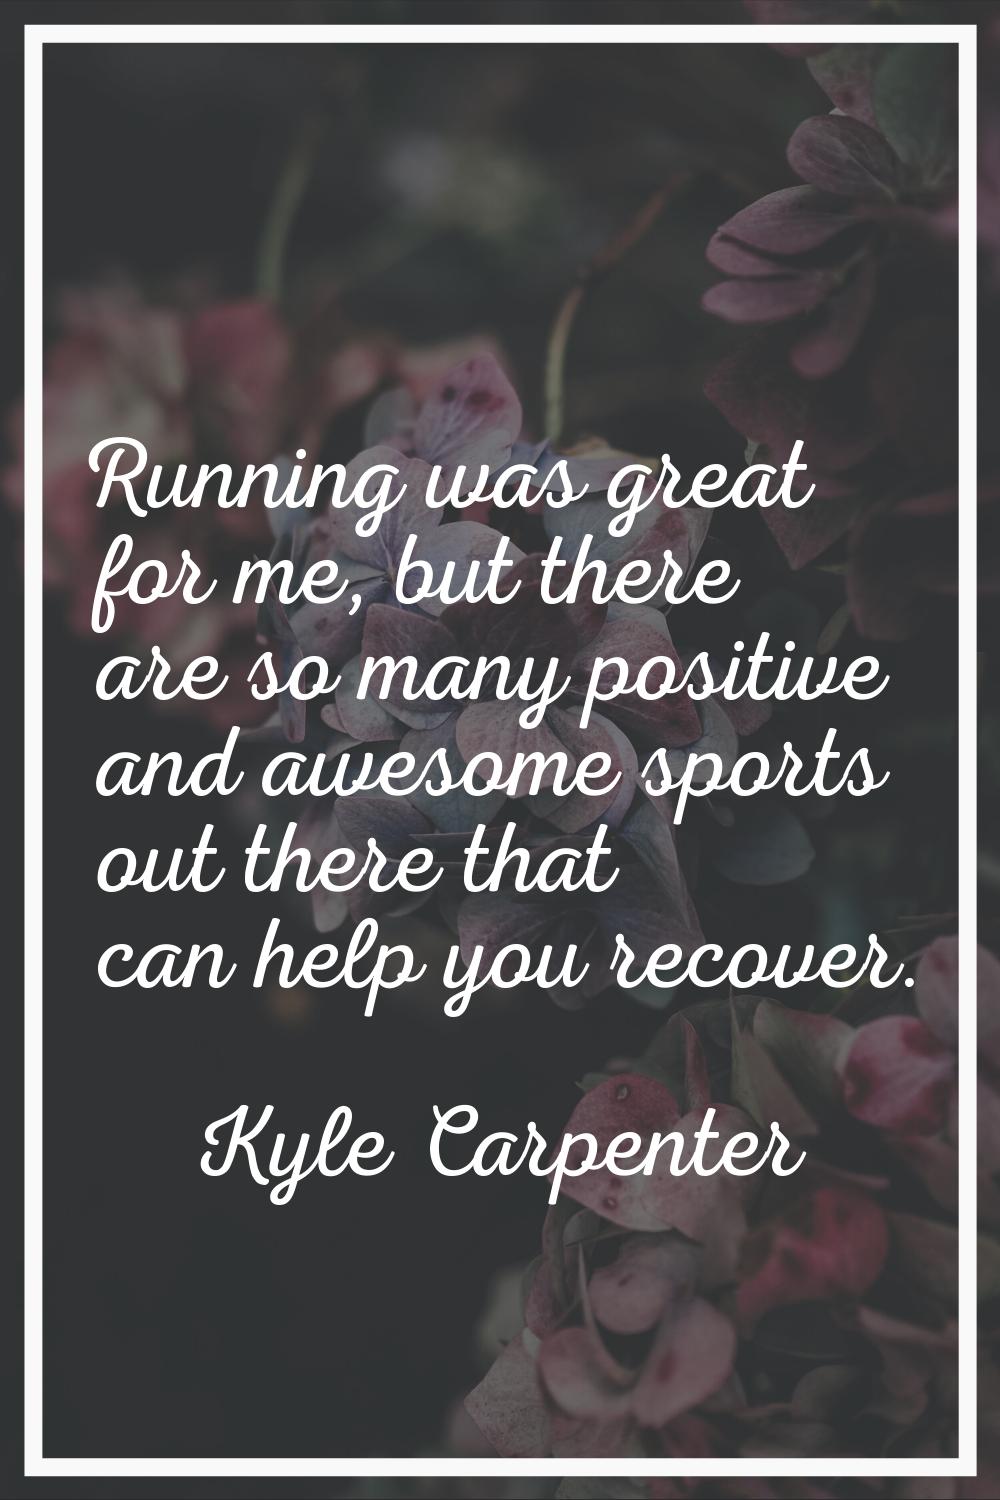 Running was great for me, but there are so many positive and awesome sports out there that can help